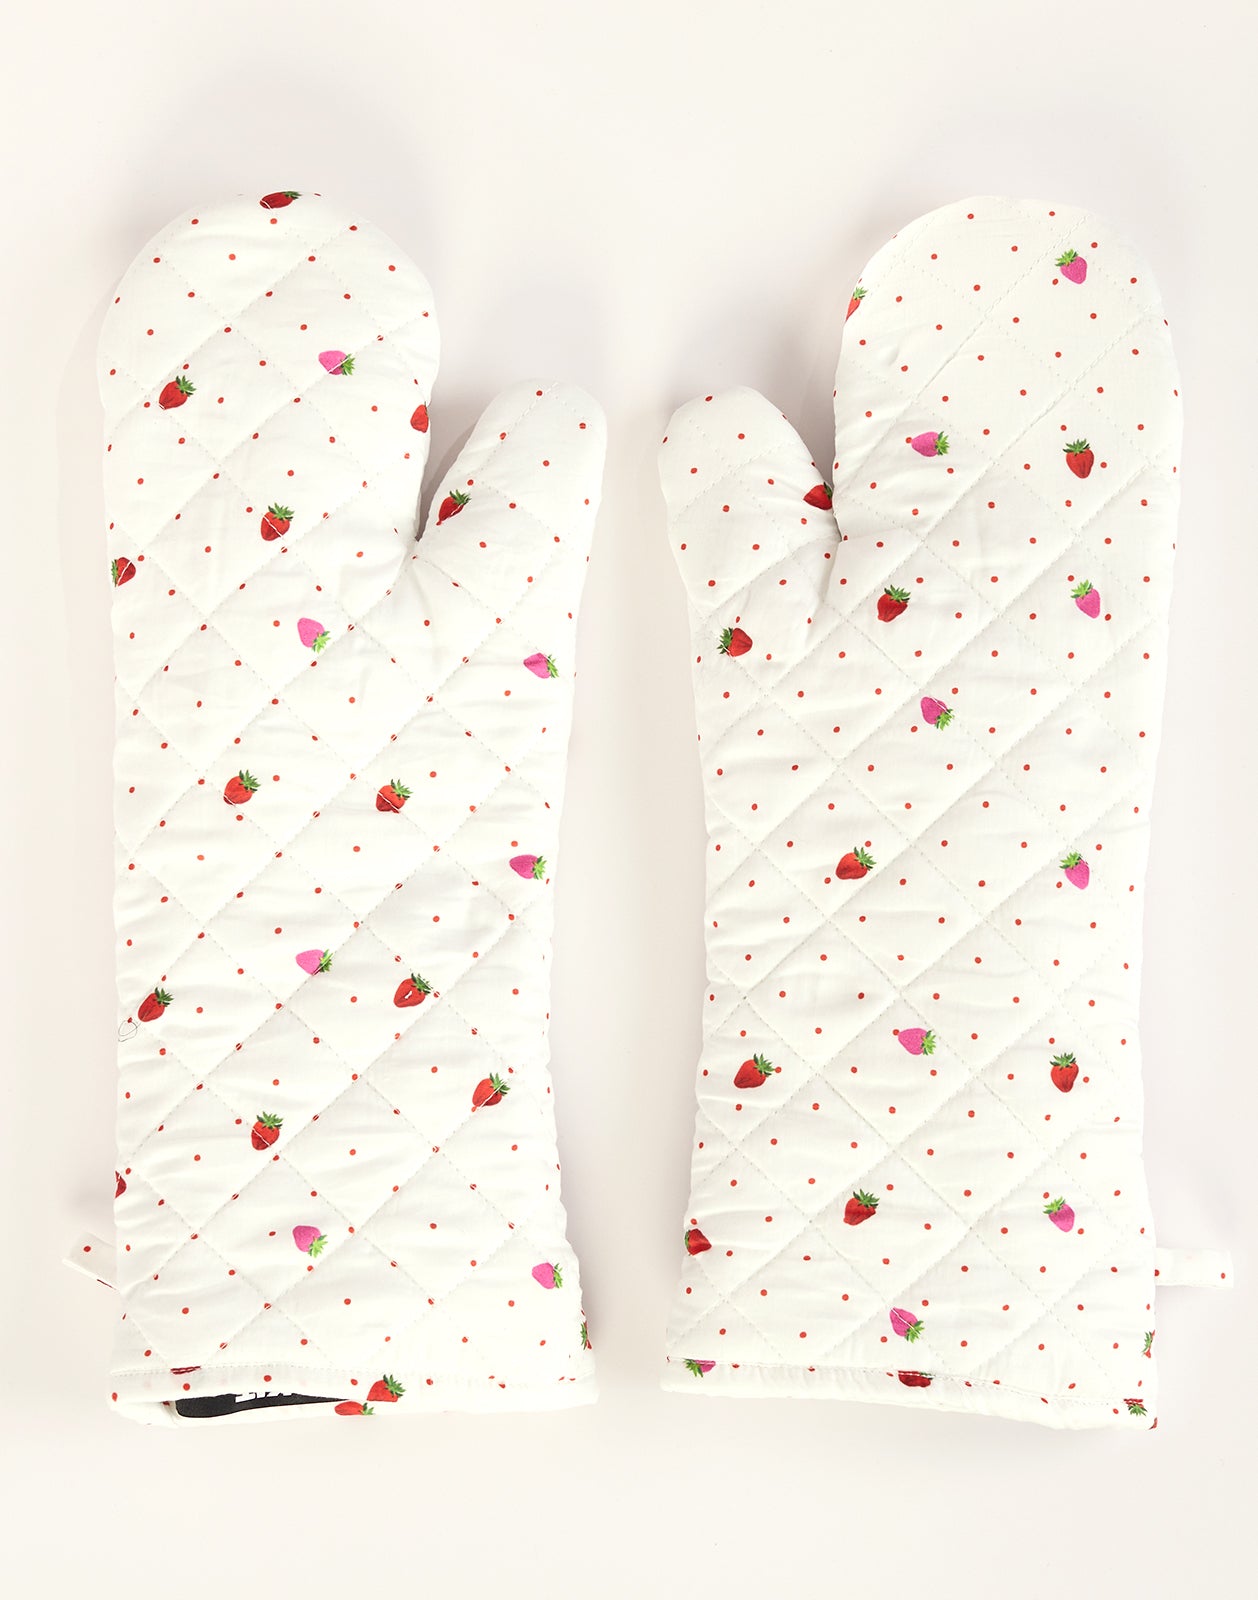 CR x Kit Quilted Oven Mitt – Cynthia Rowley